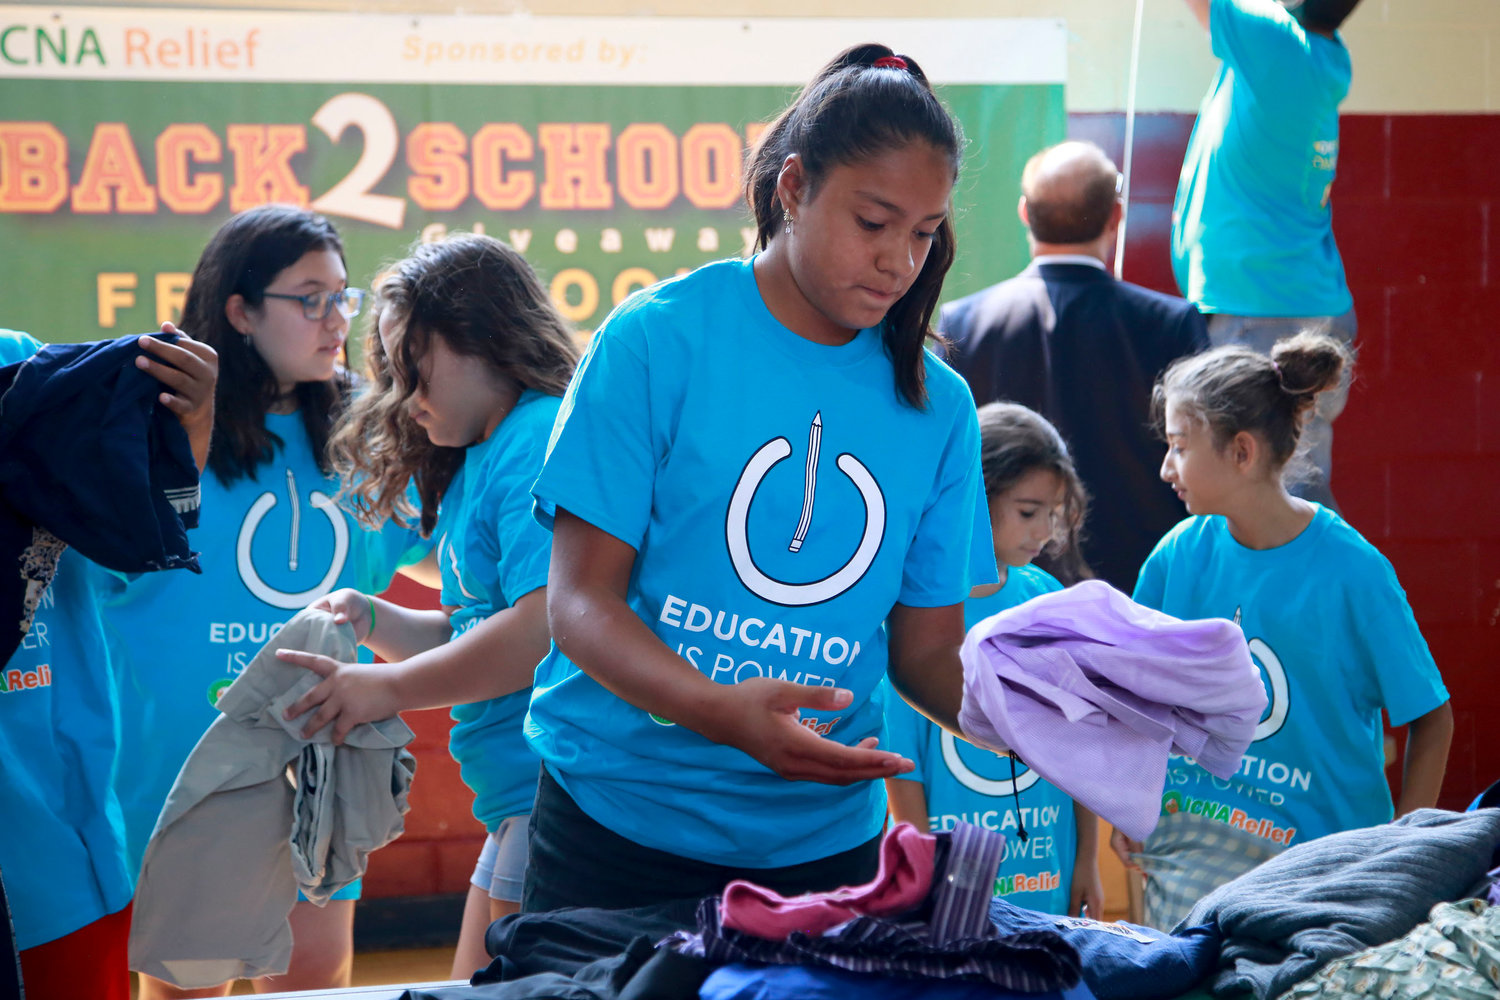 Eighth-grader Emily Flores volunteered her time to help sort the clothes distributed at the event.